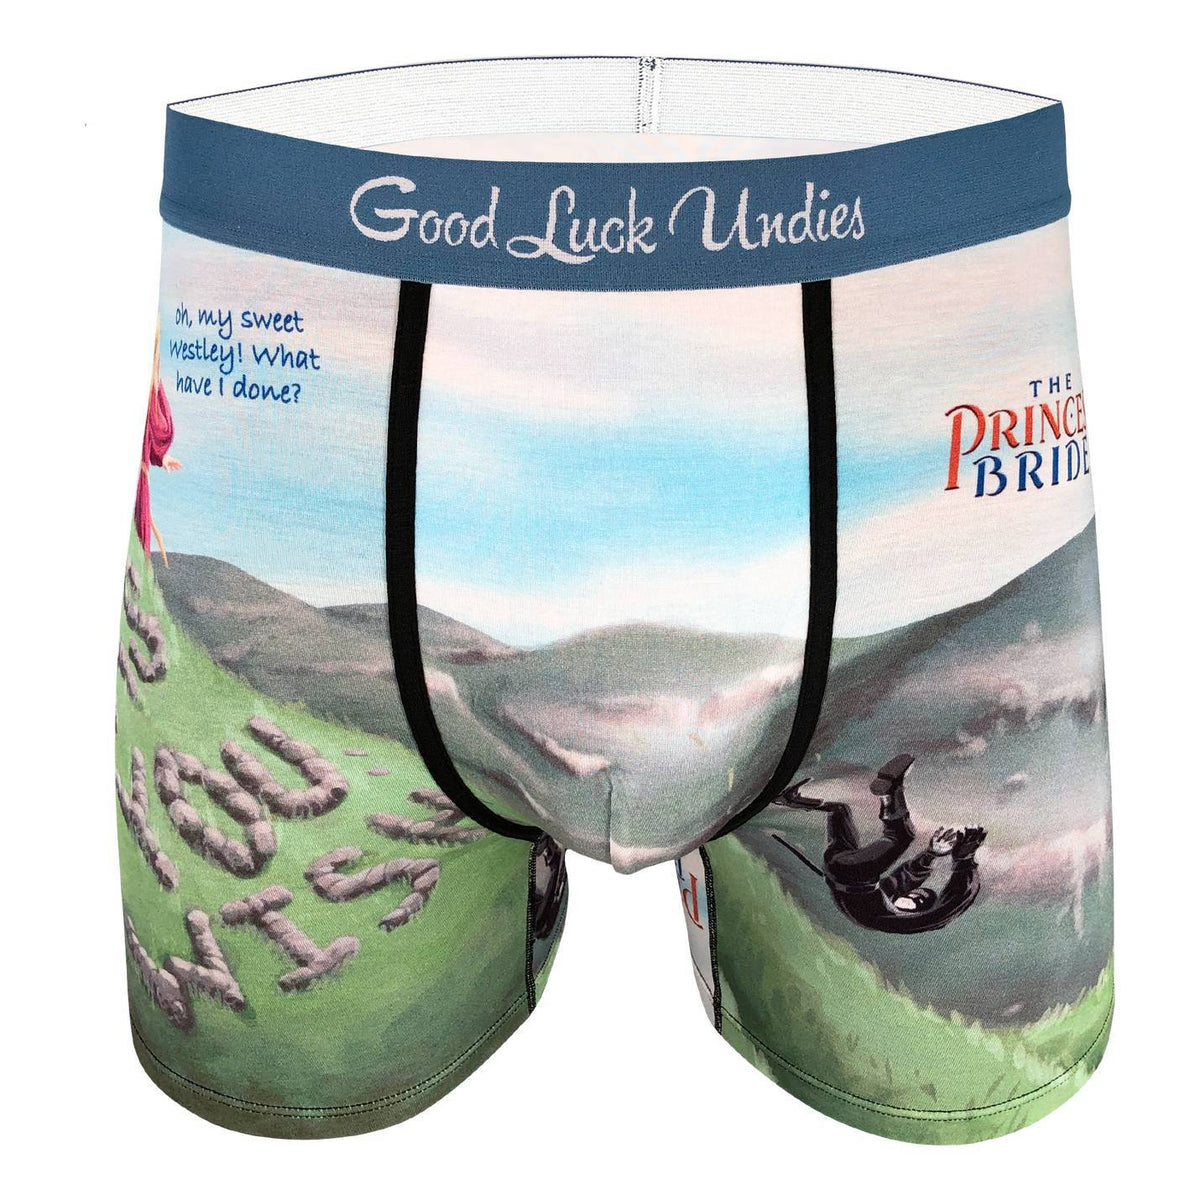 5 Places To Buy Underwear Online You Wish You Knew About Sooner